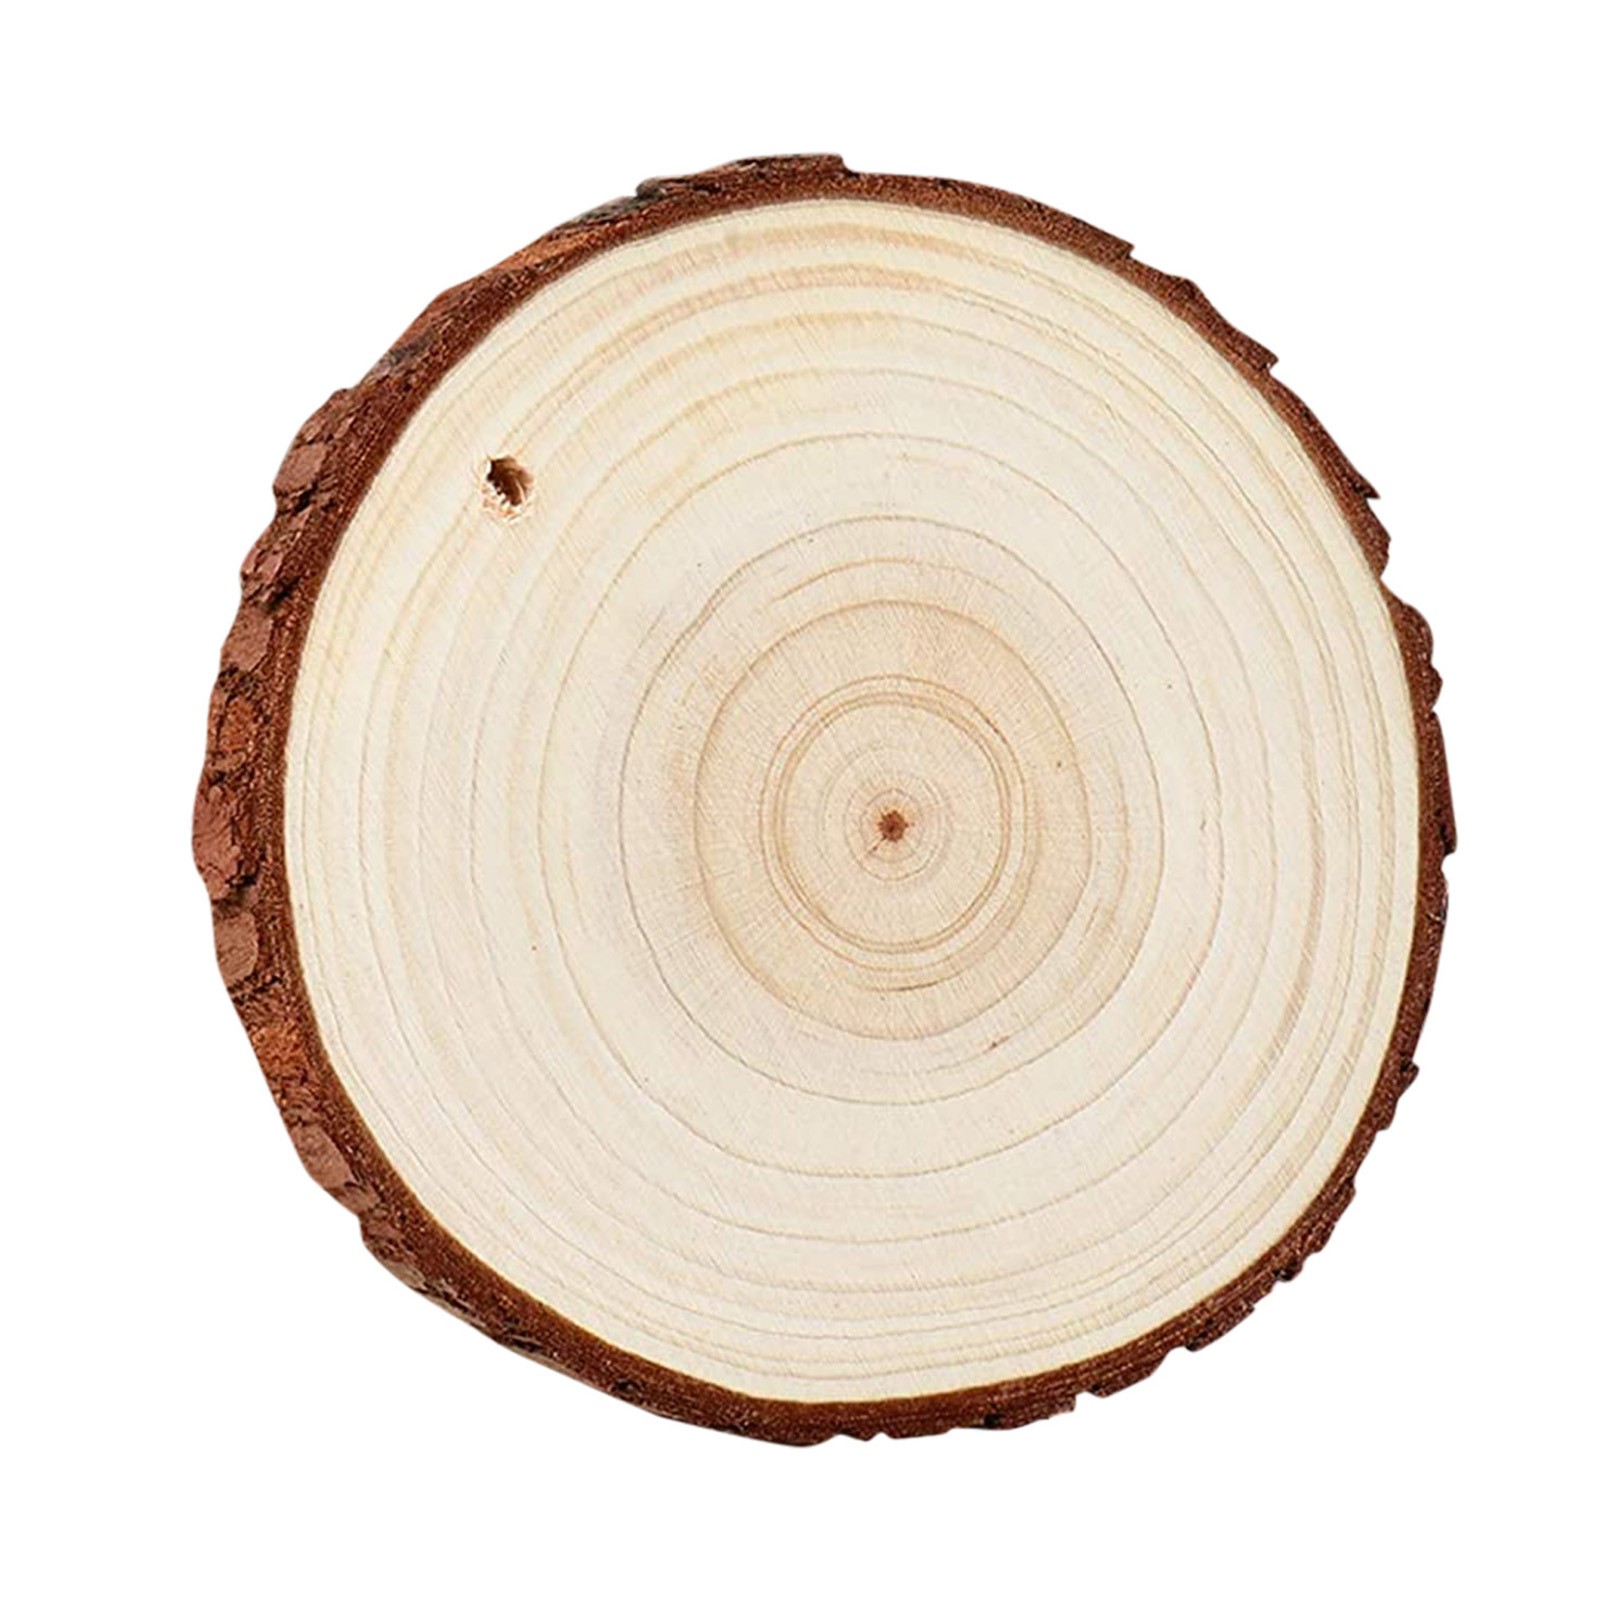 Blgat Natural Wood Slices - 10 Pcs 0.23-2.6 Inches Craft Unfinished Wood Kit Predrilled with Hole Wooden Circles for Arts Wood Slices A, Size: One